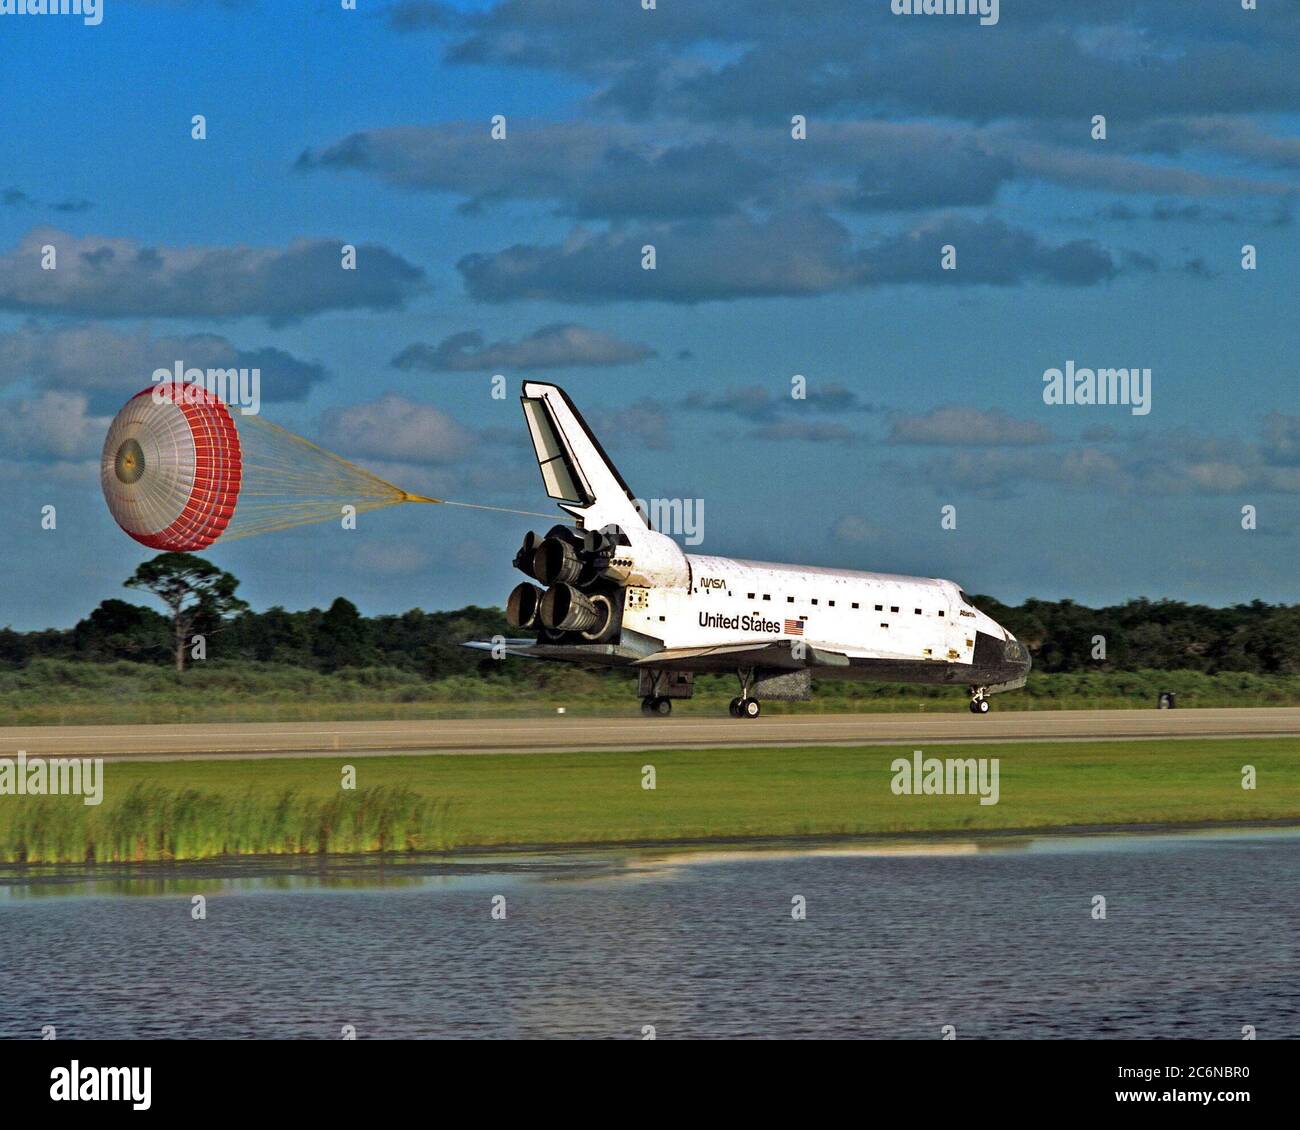 KENNEDY SPACE CENTER, Fla. -- The orbiter drag chute deploys after the Space Shuttle orbiter Atlantis lands on Runway 15 of the KSC Shuttle Landing Facility (SLF) at the conclusion of the nearly 11-day STS-86 mission. Main gear touchdown was at 5:55:09 p.m. EDT, Oct. 6, 1997, with an unofficial mission-elapsed time of 10 days, 19 hours, 20 minutes and 50 seconds. The first two KSC landing opportunities on Sunday were waved off because of weather concerns. The 87th Space Shuttle mission was the 40th landing of the Shuttle at KSC. On Sunday evening, the Space Shuttle program reached a milestone: Stock Photo